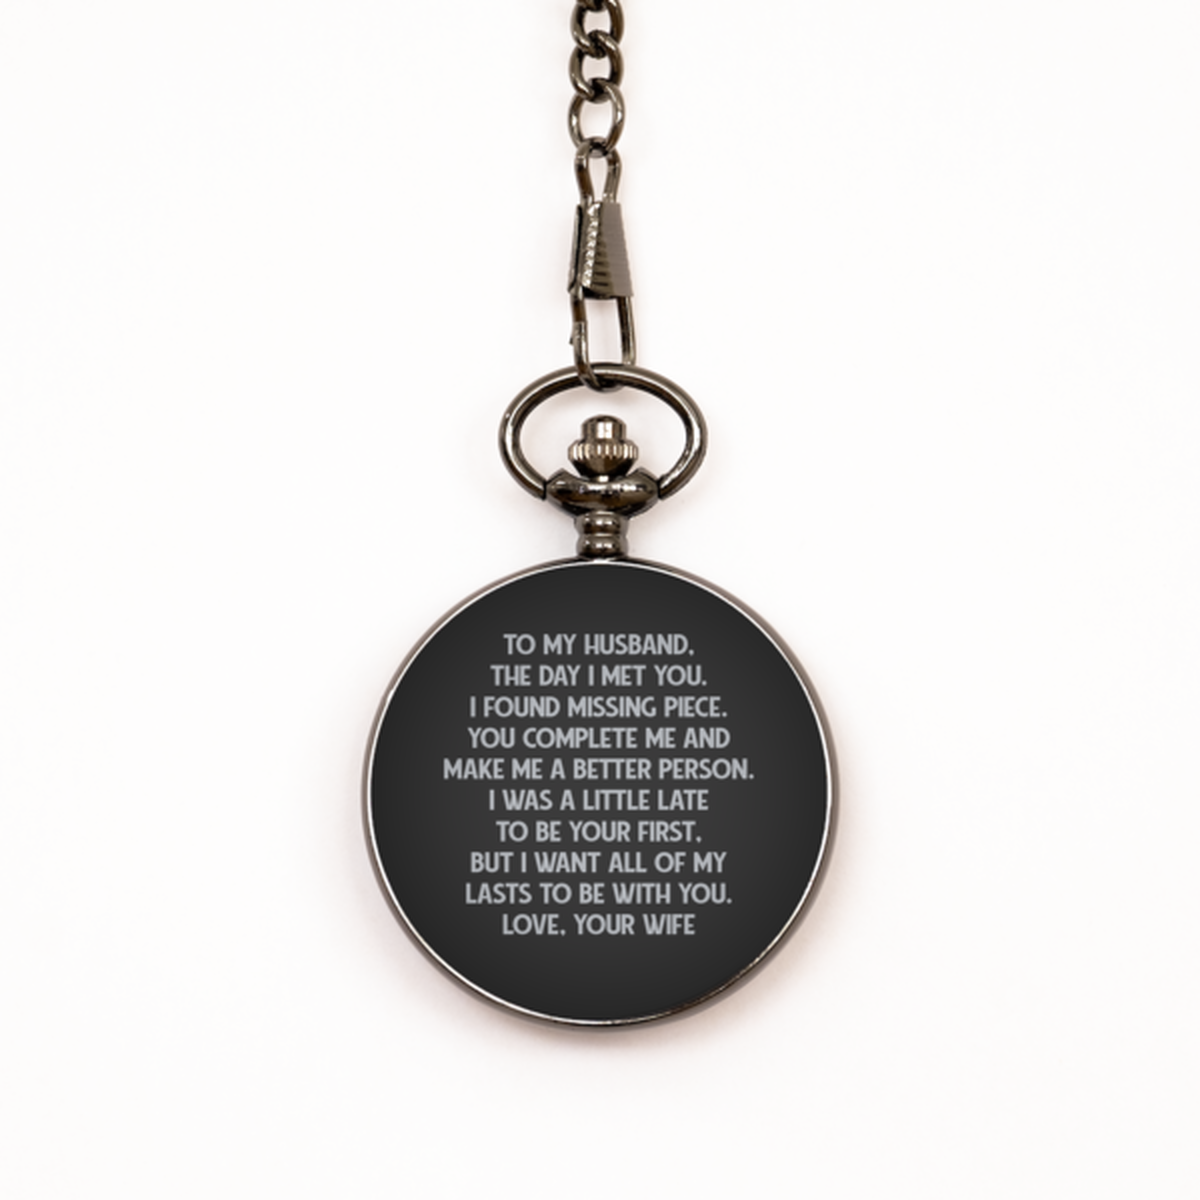 To My Husband Black Pocket Watch, I Found Missing Piece, Anniversary Gifts For Husband From Wife, Birthday Gifts For Men